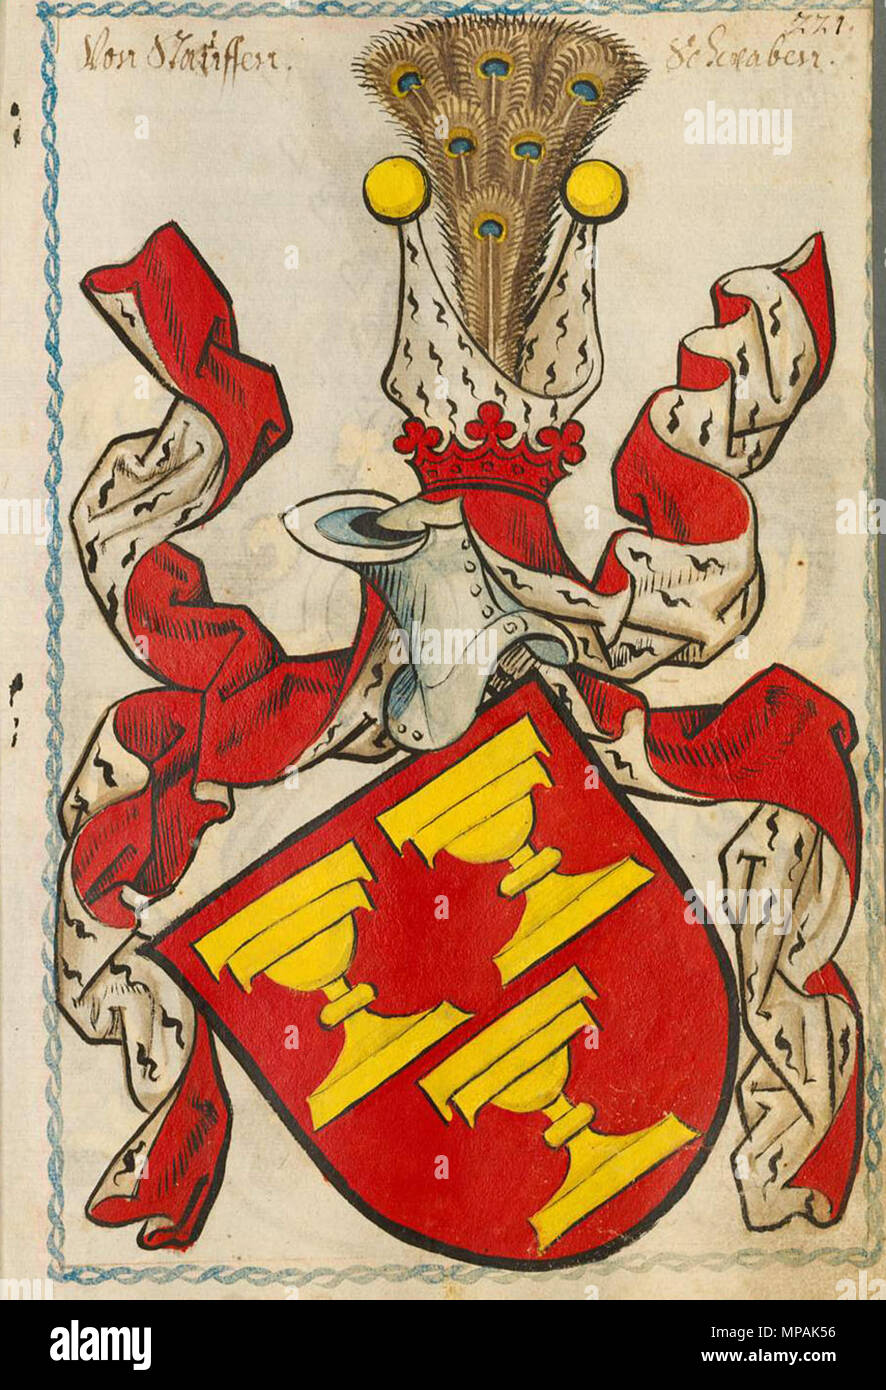 . English: The canting coat of arms of the Lords of Staufen. The ancient german word 'staufen' means mugs, chalices, goblets – used for communion). Some places the Lords of Staufen controlled also display the von Staufen coat of arms. It is currently used in Switzerland in Gemeinde Staufen[1] and Staufen, Aargau, found in Germany in the areas of Ballrechten-Dottingen and Pfaffenweiler, and was also in the former coat of arms of Wettelbrunn, Norsingen and Scherzingen. The coat of arms of the city of Staufen im Breisgau is derived from this coat of arms. Deutsch: Wappen der Herren von Staufen. D Stock Photo